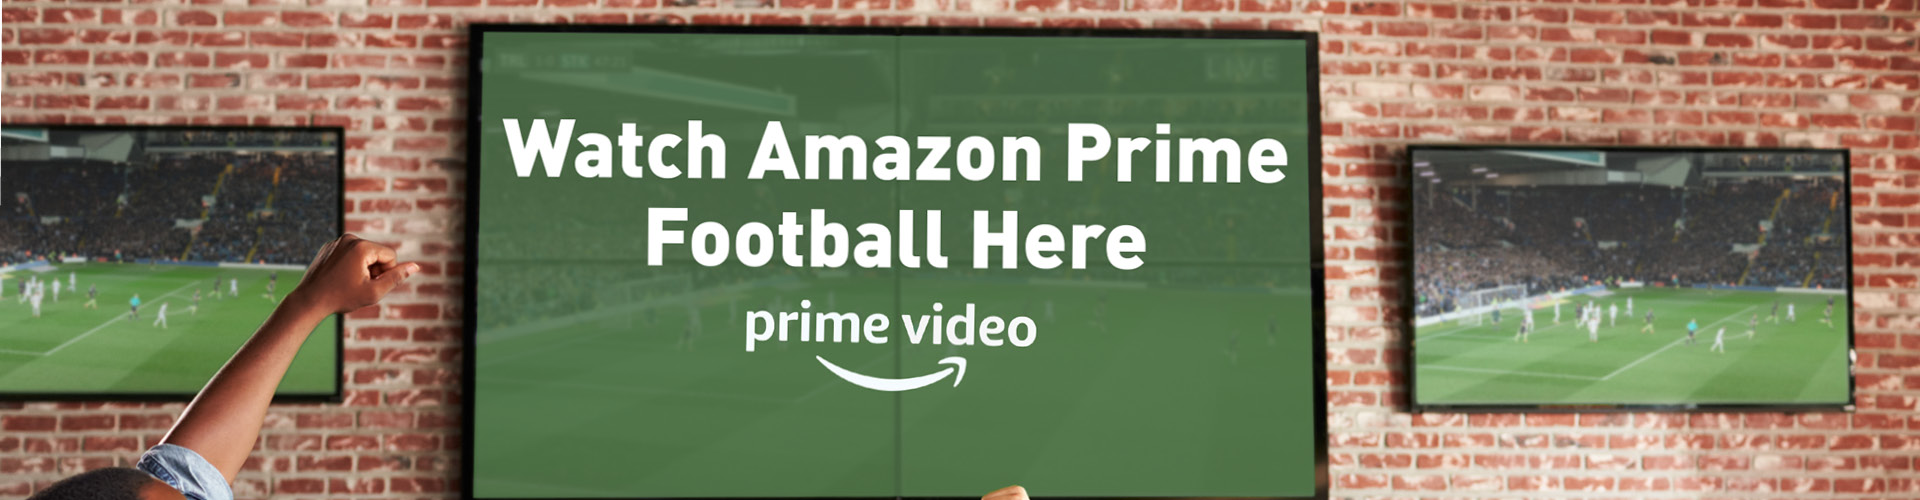 Watch Amazon Prime football at The English Lounge in Manchester